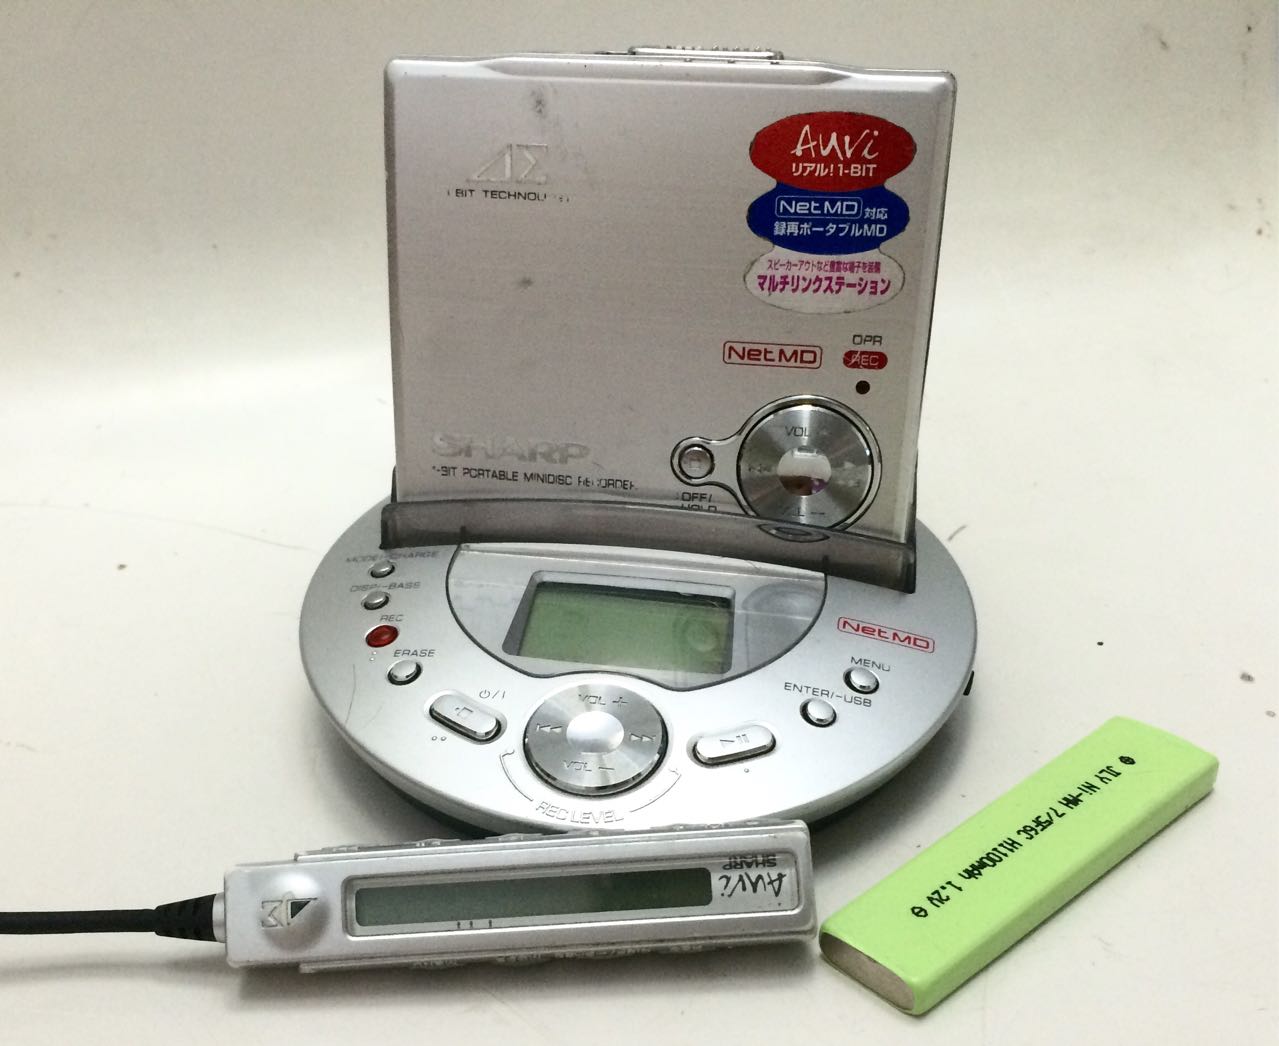 [Secondhand products]Sharp/Sharp MD-DR80 Recorder-Player Unit Netmd with Base Wire-Controlled Gift Battery